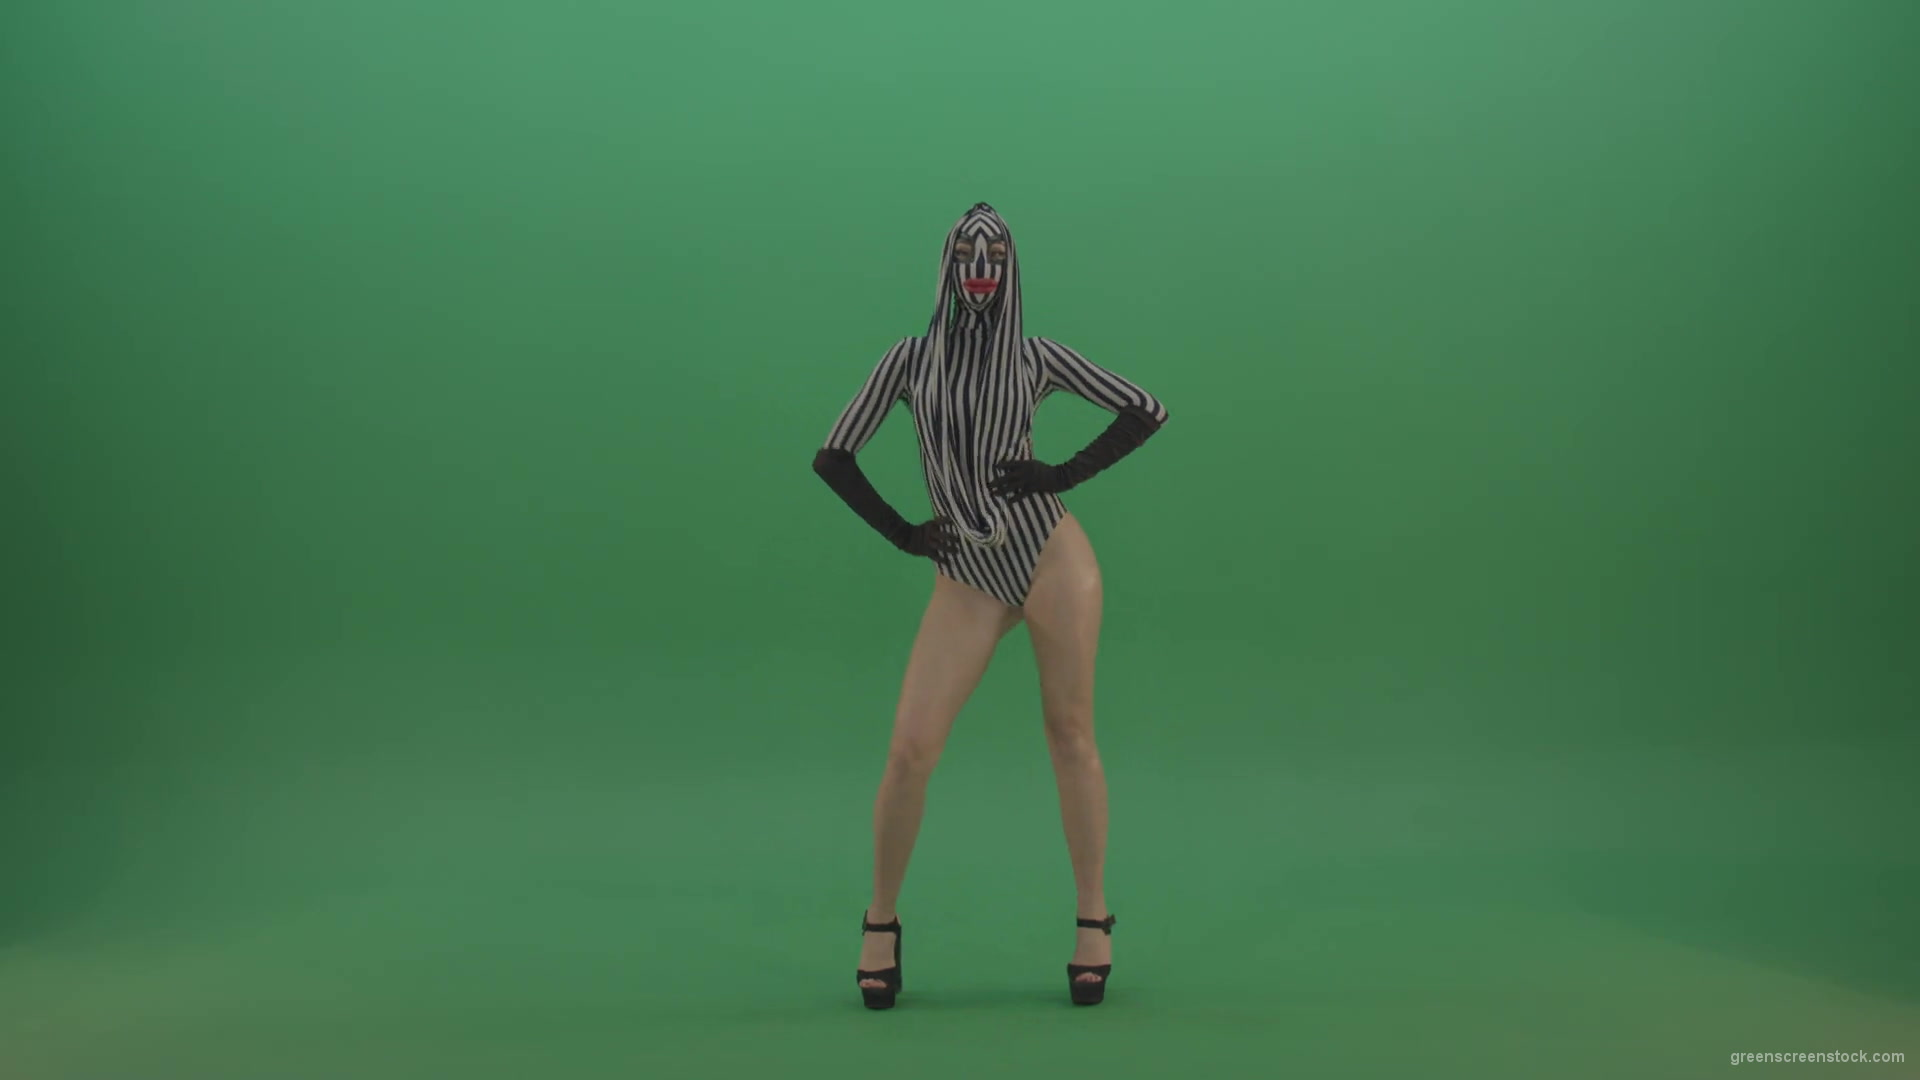 Ass-shake-beats-by-edm-go-go-girl-dance-isolated-on-green-screen-1920_005 Green Screen Stock